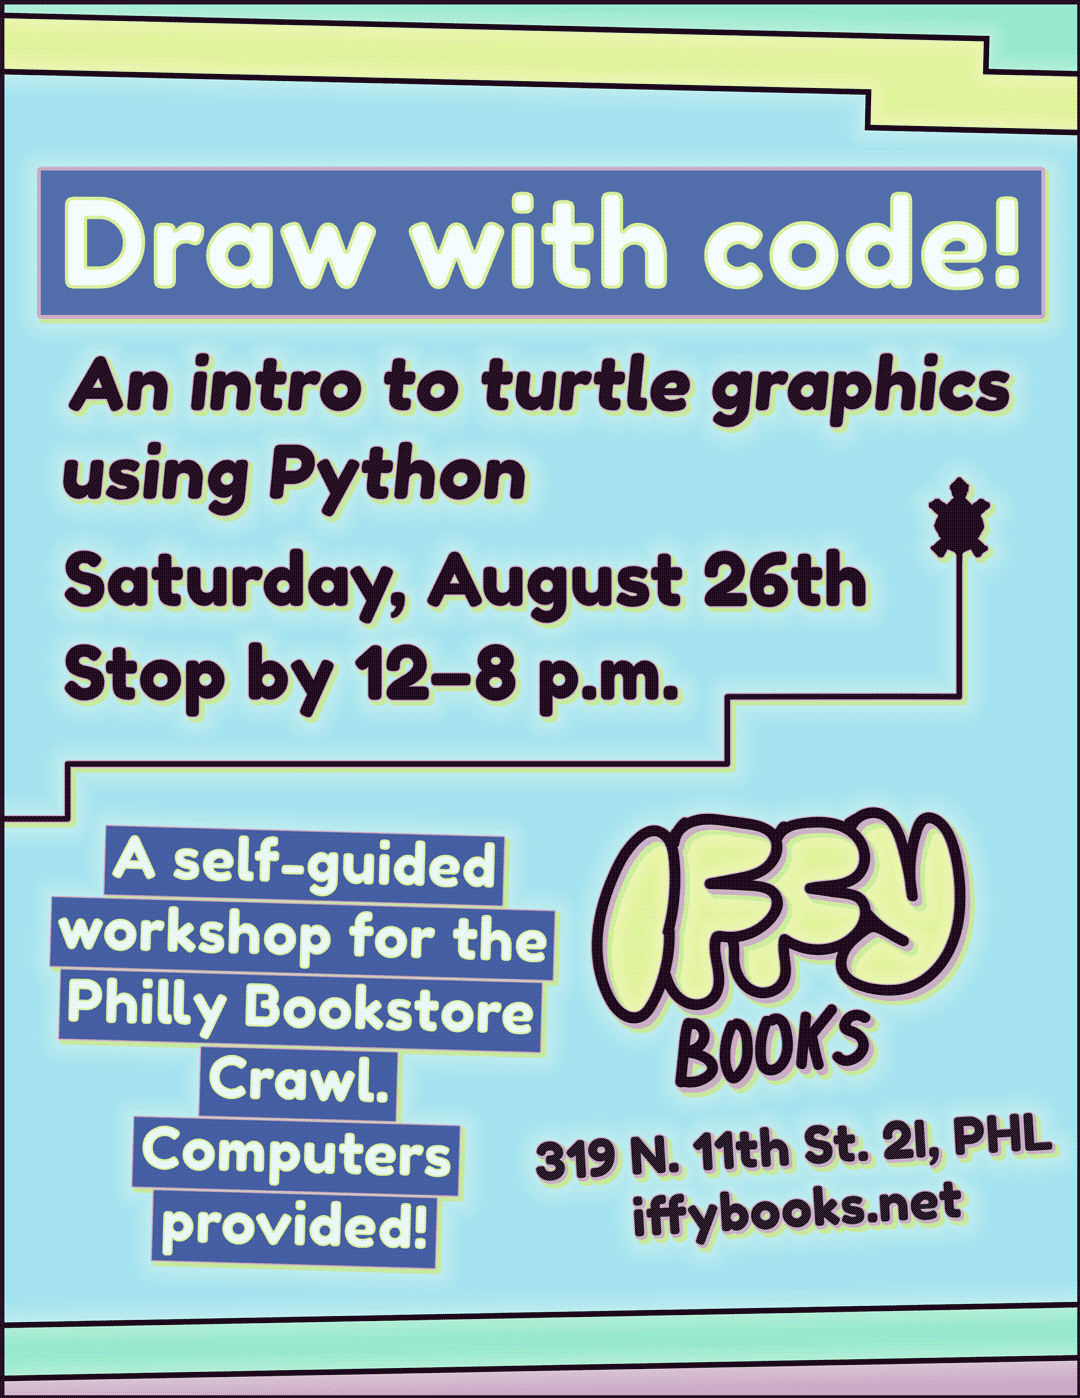 Flyer with a pastel blue background and pastel stripes along the top and bottom. There's a simple illustration of a tiny turtle with straight lines indicating its path. The text reads: Draw with code! An intro to turtle graphics using Python / Saturday, August 26th / Stop by 12–8 p.m. / A self-guided workshop for the Philly Bookstore Crawl. / Computers provided! / Iffy Books / 319 N. 11th St. 2I, PHL / iffybooks.net